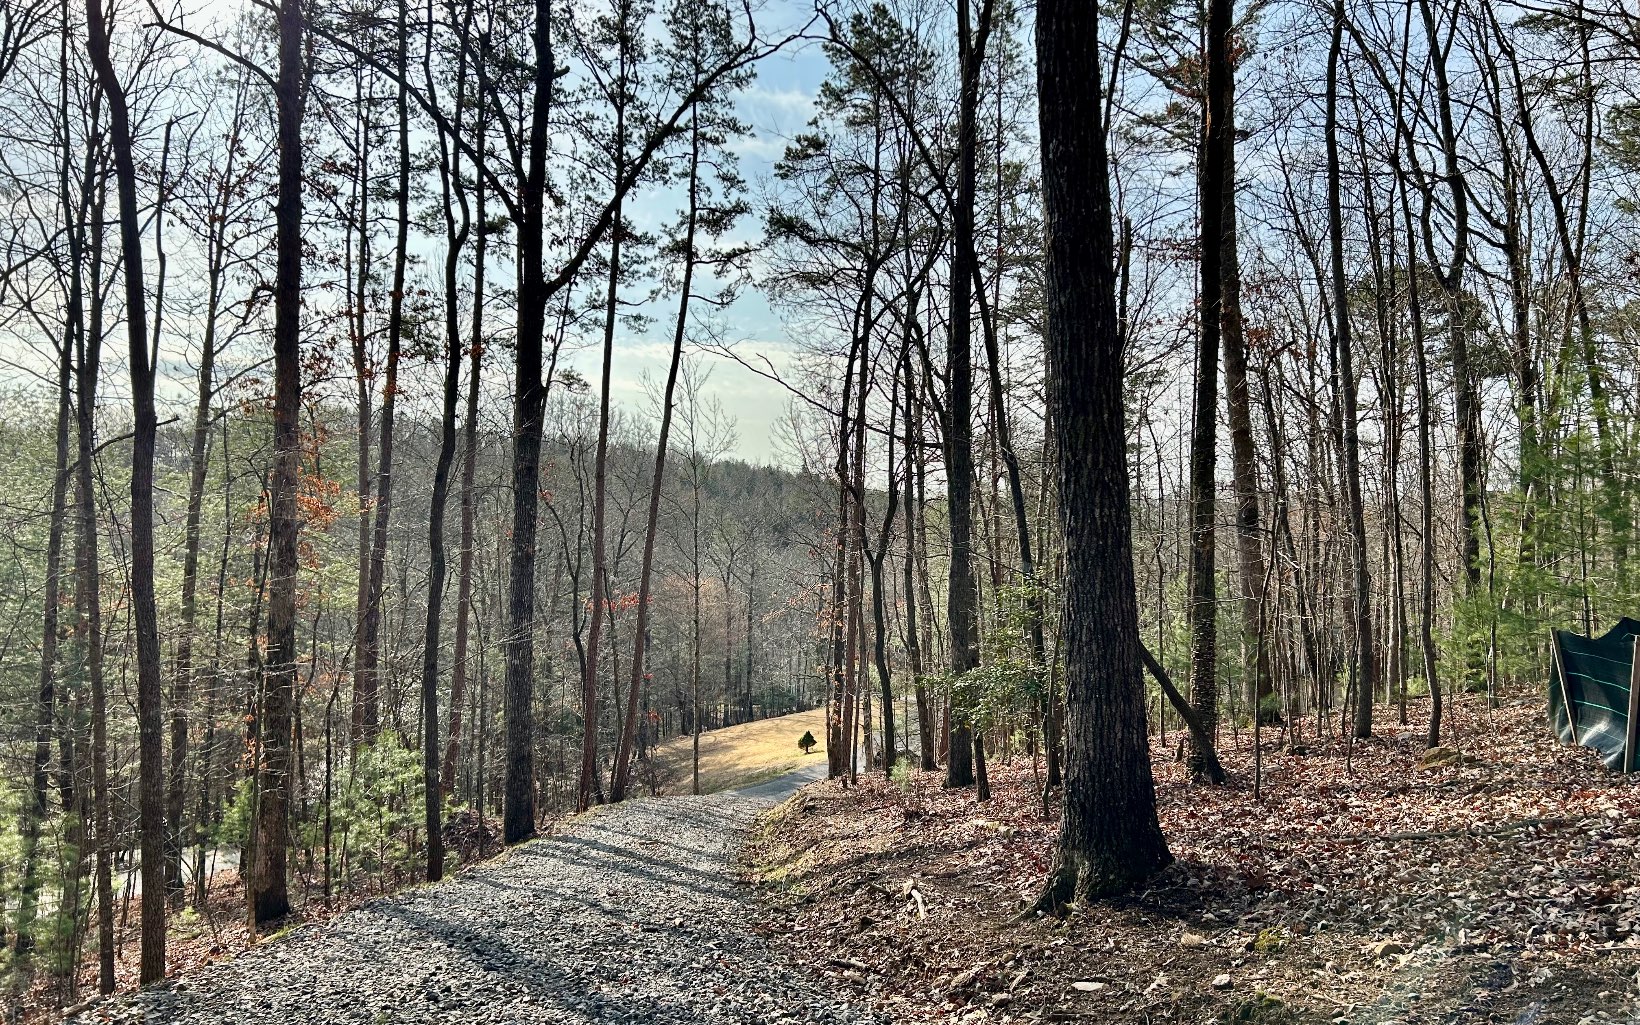 Looking To Build Your Forever Home?? - This 1.99 Acre Lot in Beautiful Quin Springs Subdivision in Ellijay, Georgia has so much to offer. Features include Seasonal Mountain View, Branch with Quin Springs on corner of lot, Driveway In Place, Lots of Hardwoods and Mountain Laurel, Located on Paved Road, Underground Utilities (Power, Phone, Cable, Internet) to Property Line and Less than 5 Miles to Downtown Ellijay for Restaurants and Shopping. No Short Term Rentals Allowed. Recommended Local Builders List Available Upon Binding Contract.